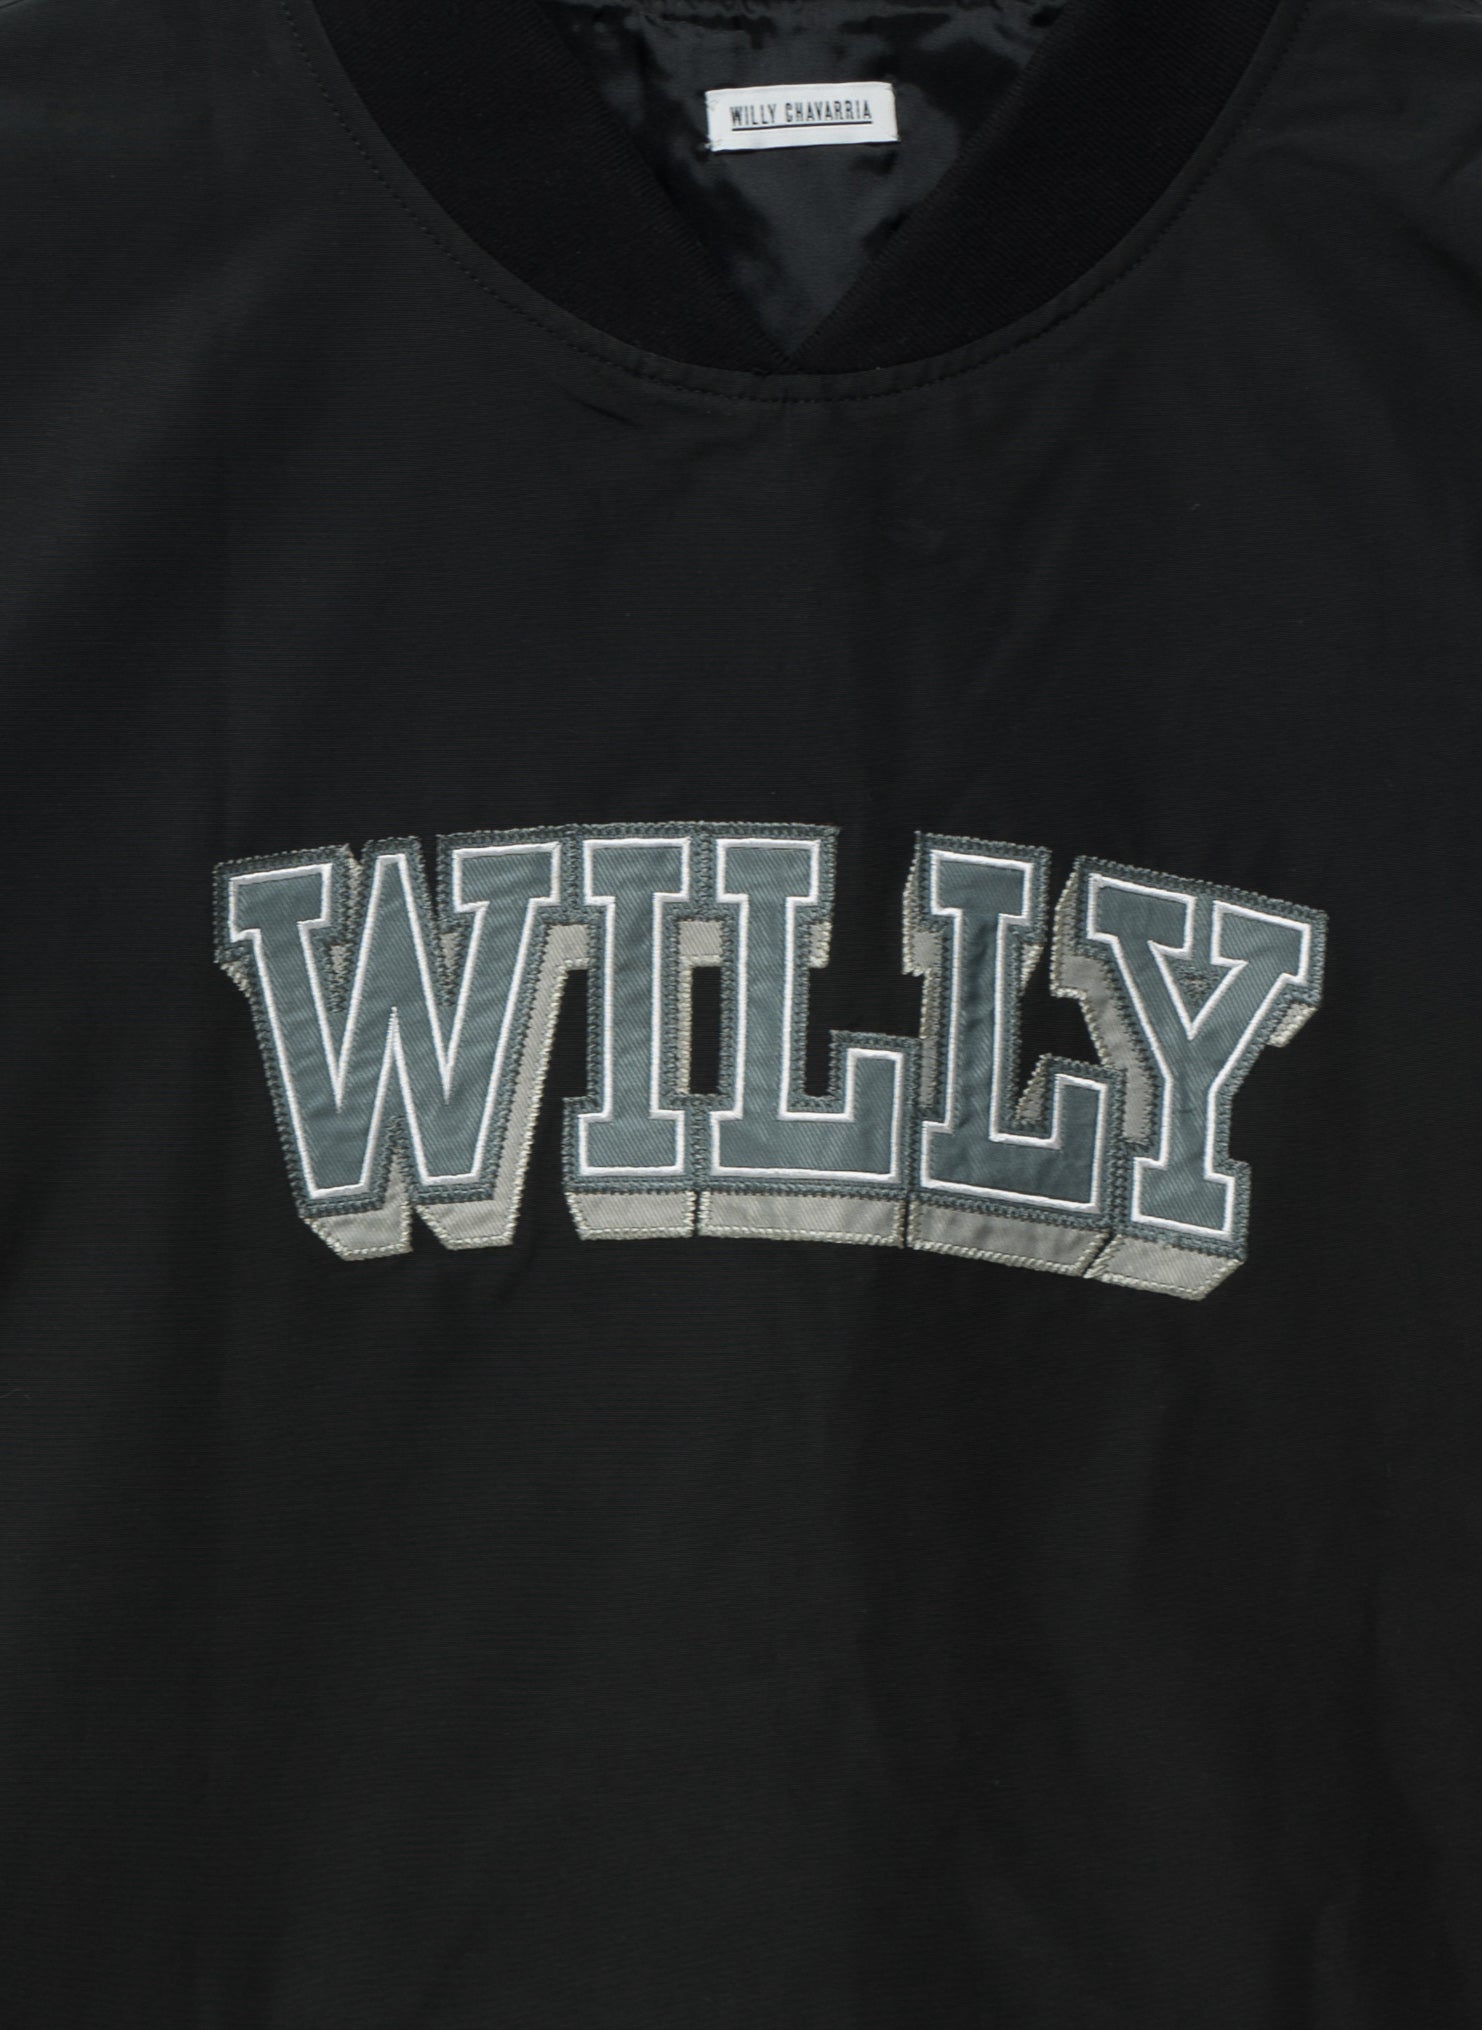 <span style="color: #f50b0b;">Last One</span> 
WILLY CHAVARRIA /  WILLY FOOTBALL JACKET